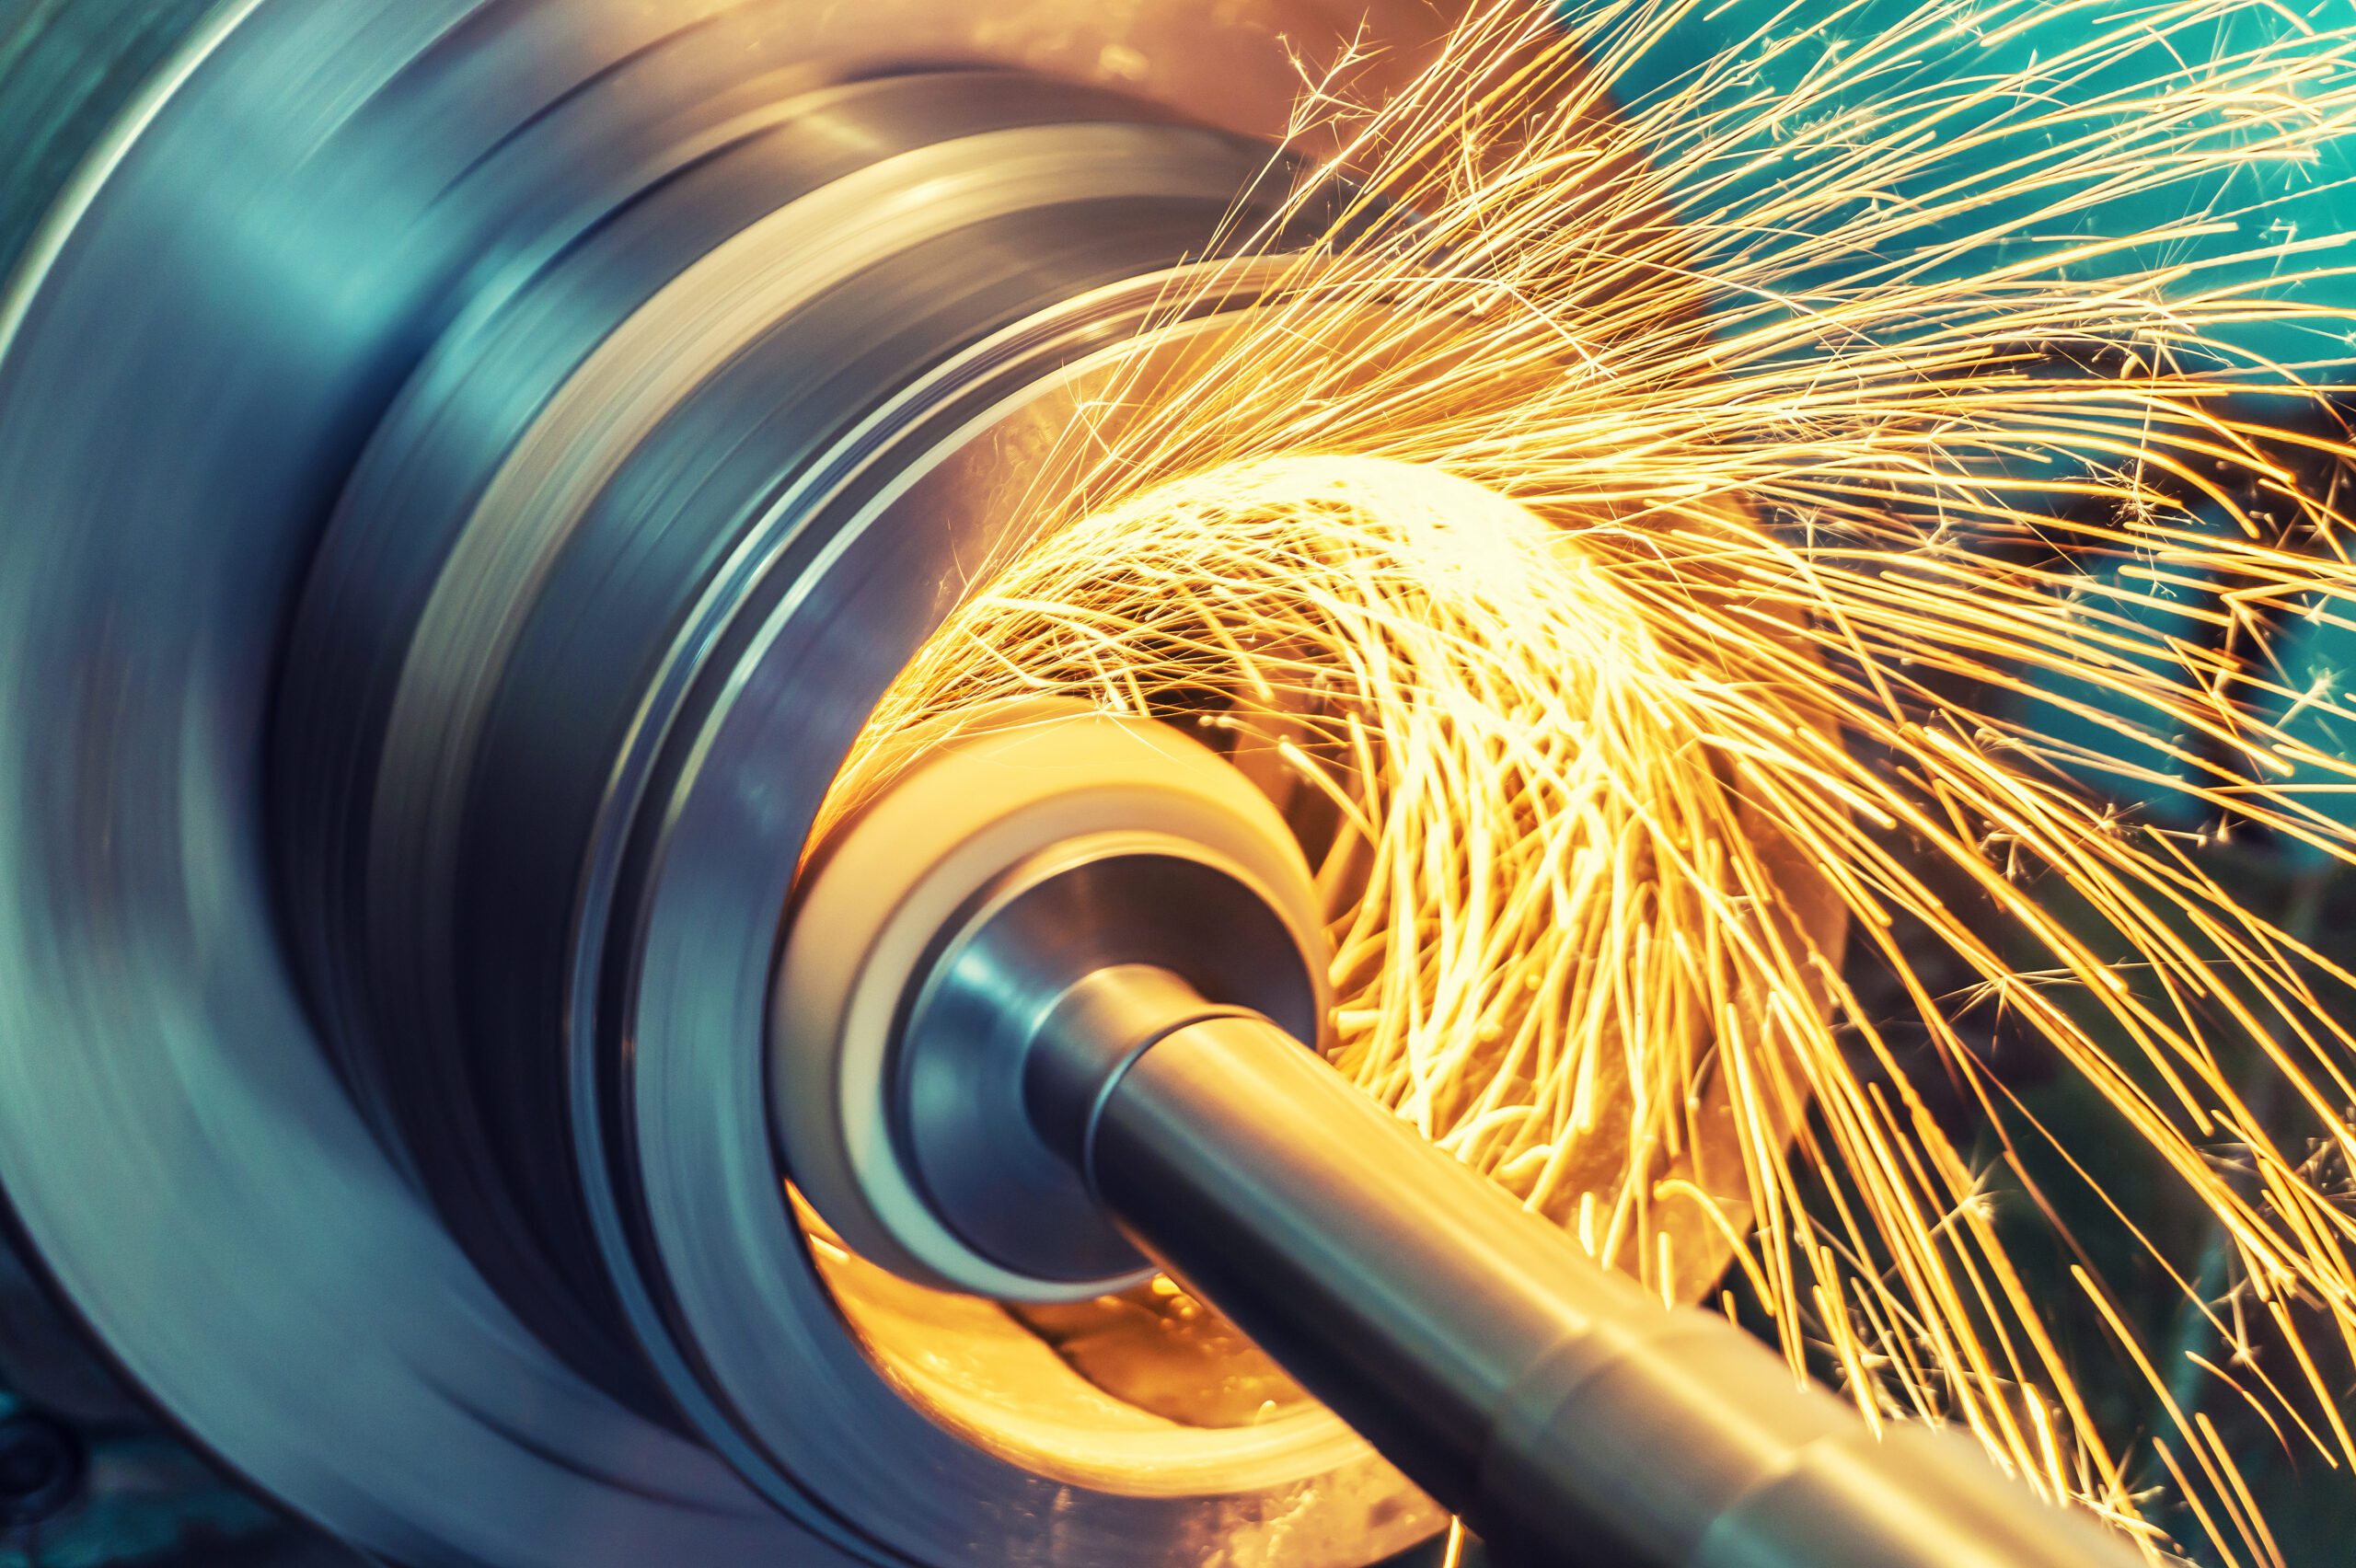 Grinding of a cylindrical part with an abrasive wheel on a machine, sparks fly in different directions.